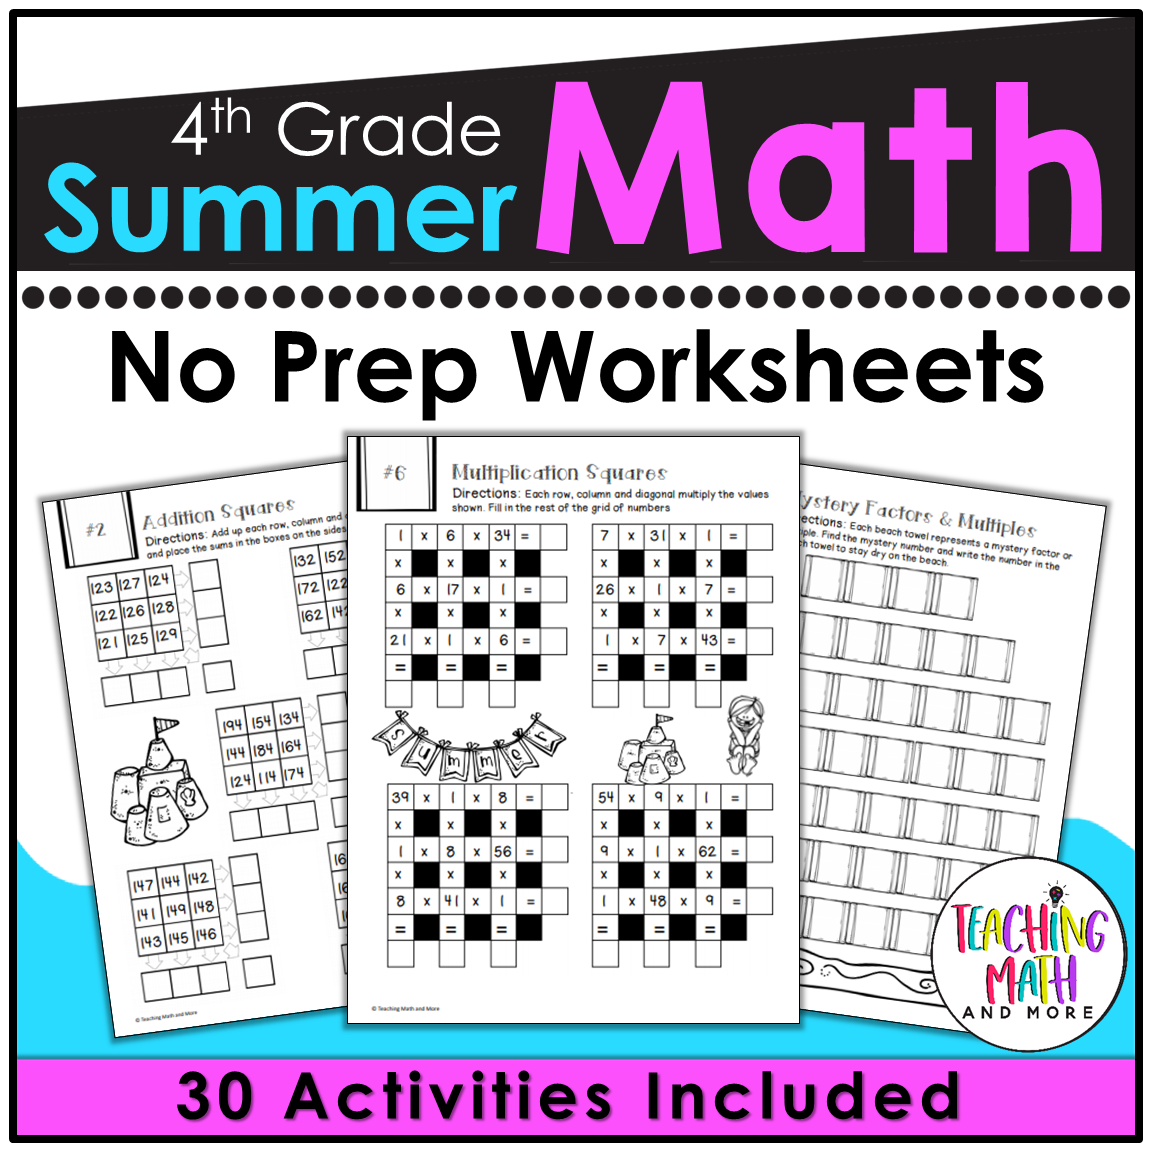 4th-grade-summer-packet-teaching-math-and-more